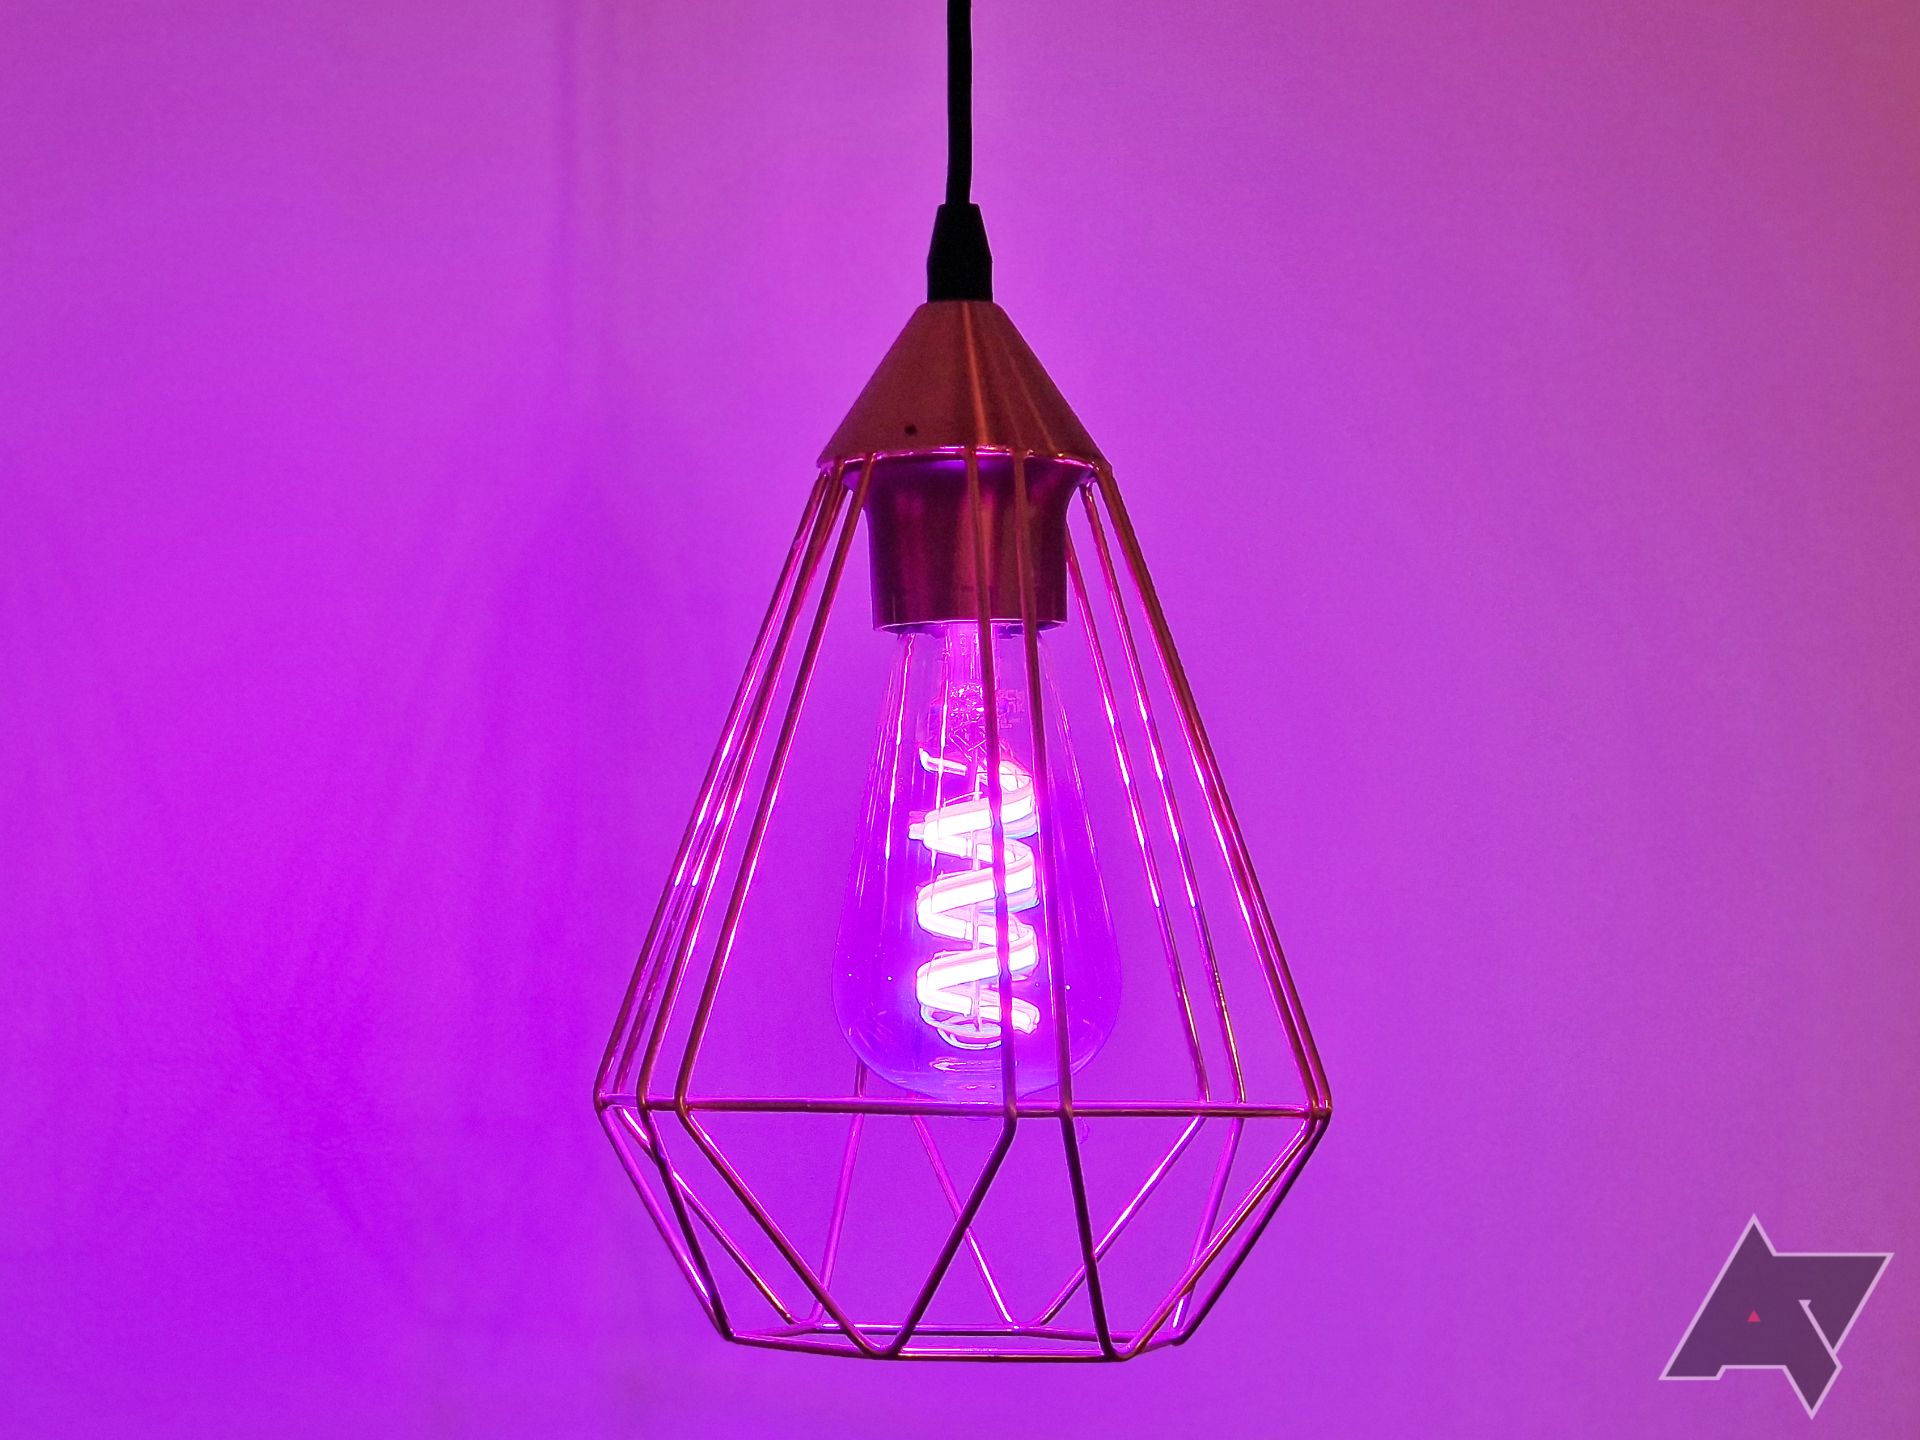 Picture of a WiZ Connected smart bulb lit up in purple, with a wall in the background reflecting the purple color